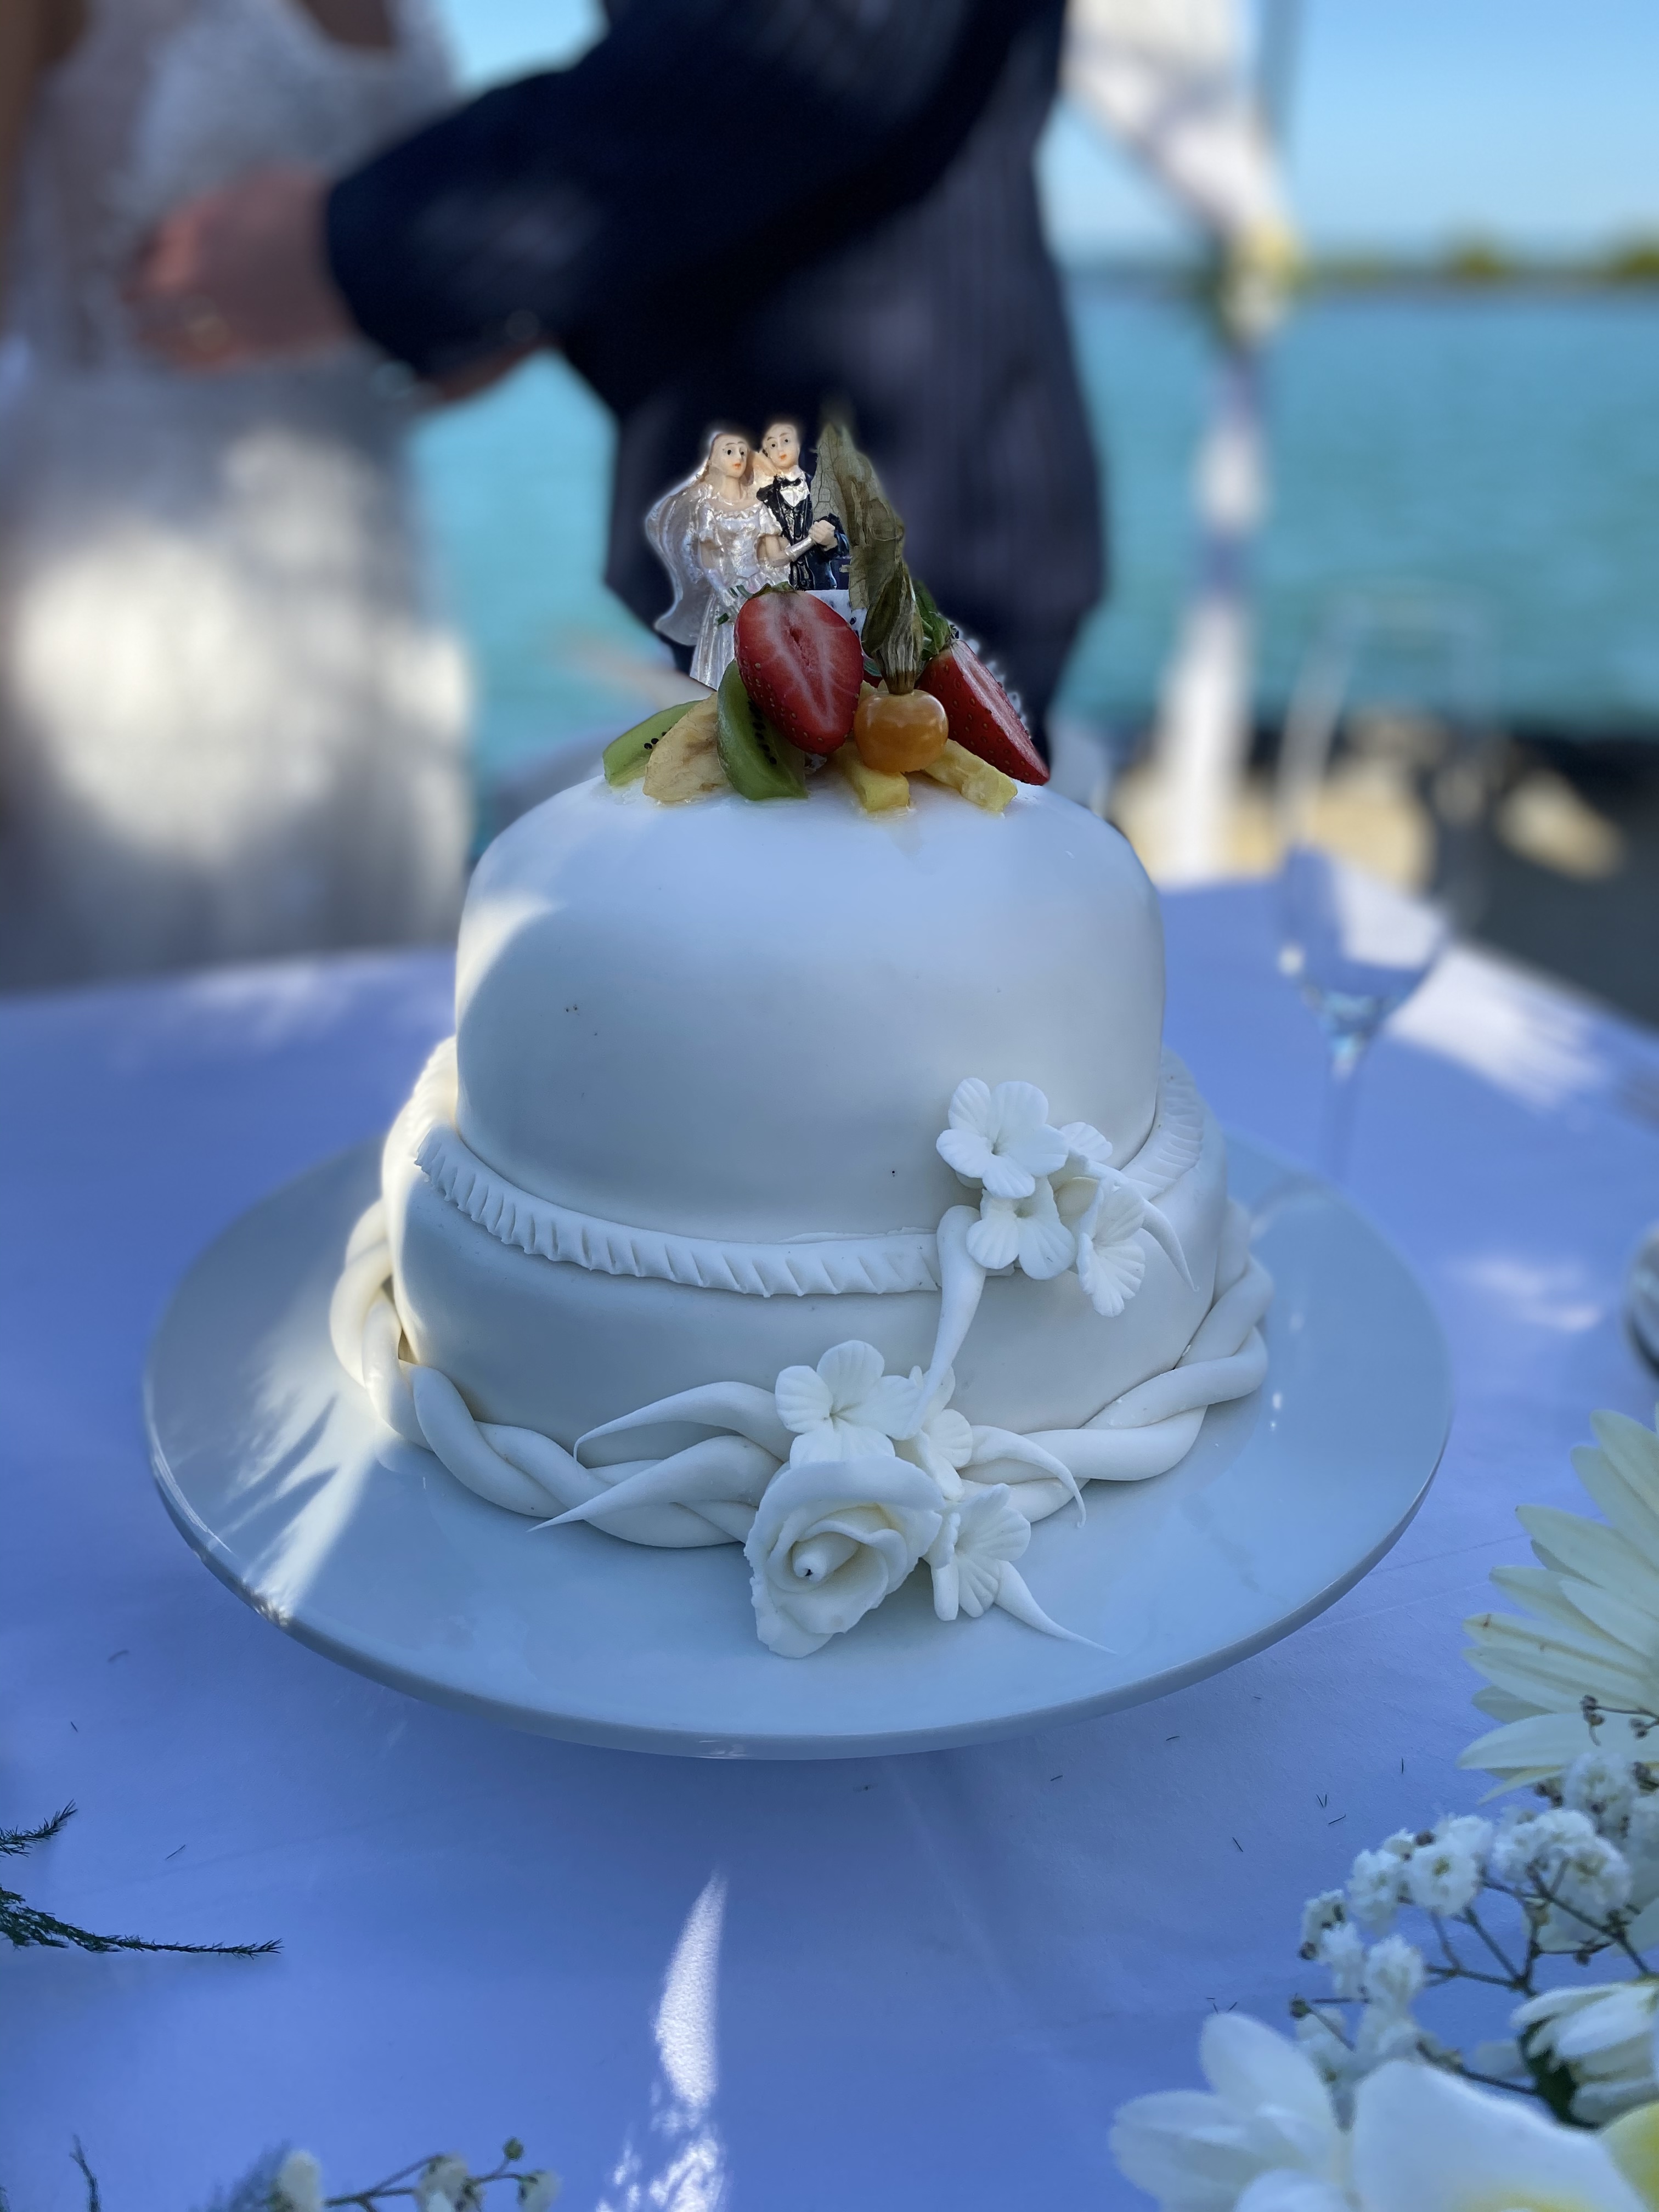 paradise cove wedding cake - real wedding review in Mauritius